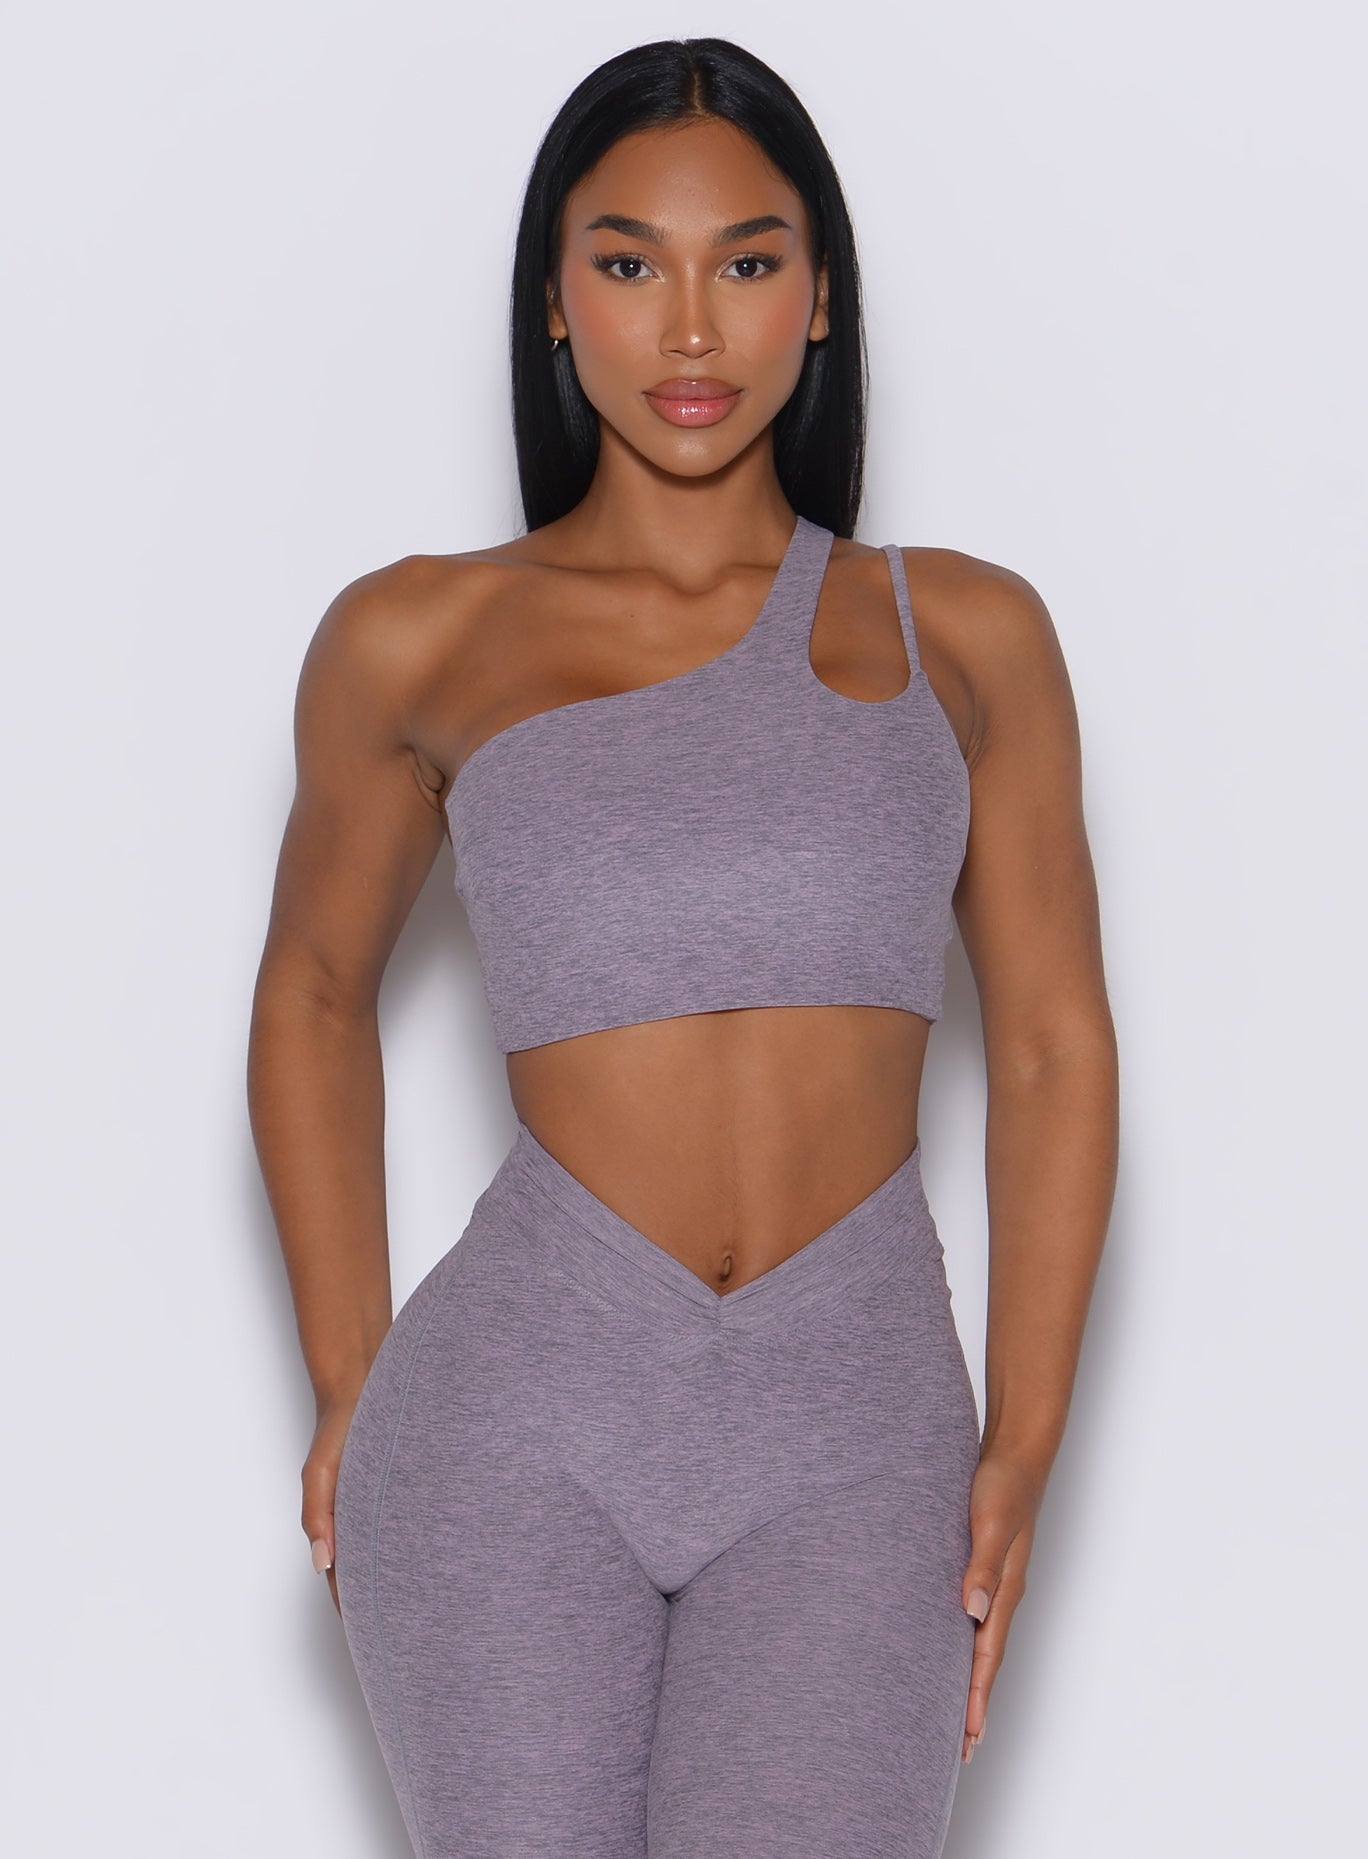 Model facingf forward wearing our lateral top in Lilac Grey along with a matching leggings